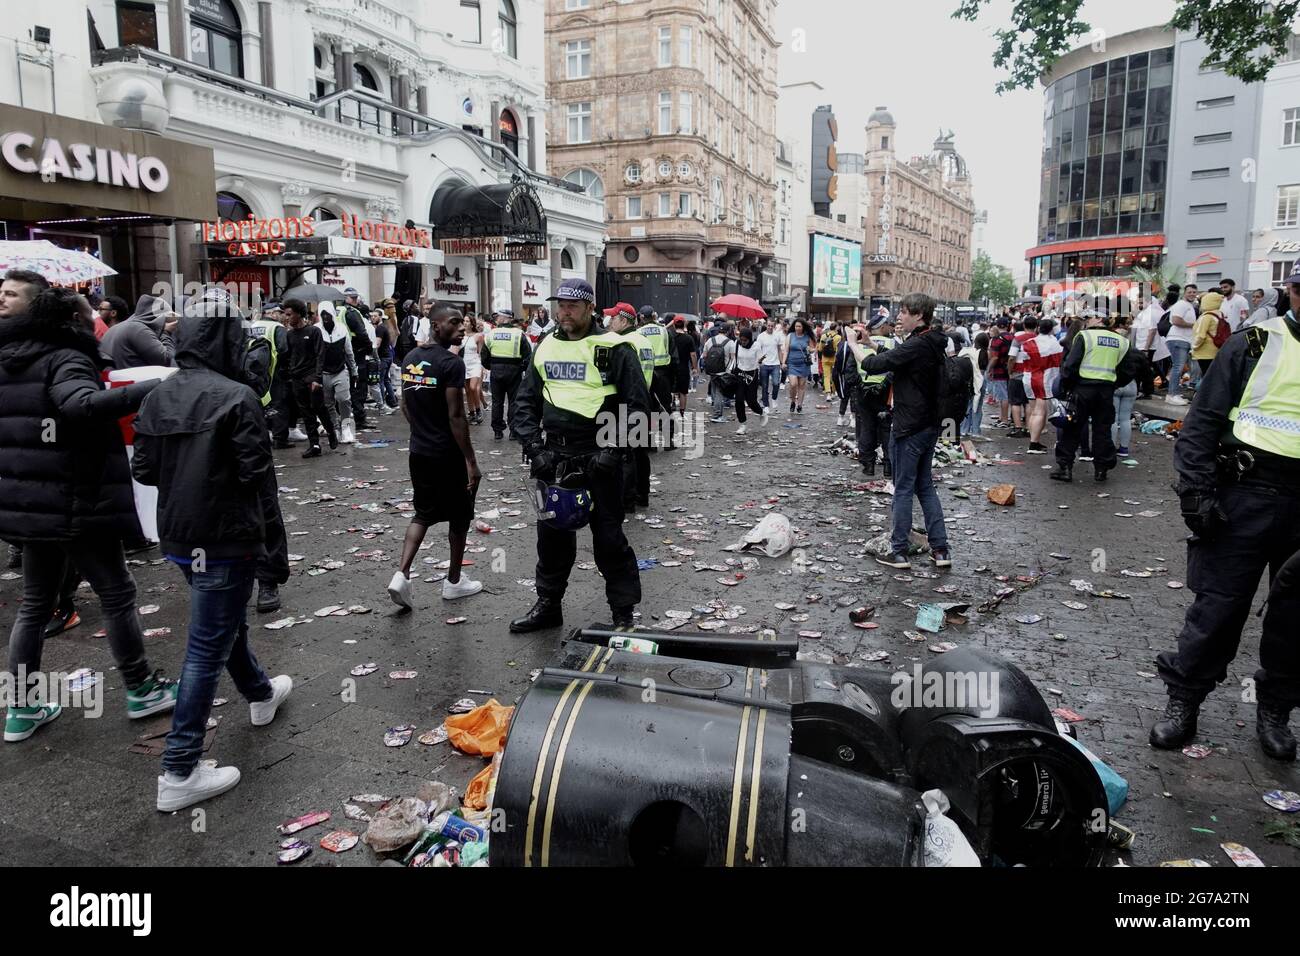 England fans gathered in central London hours before the Euros 2020 Final between England and Italy 11th July 2021; there was joy & disorder. Stock Photo